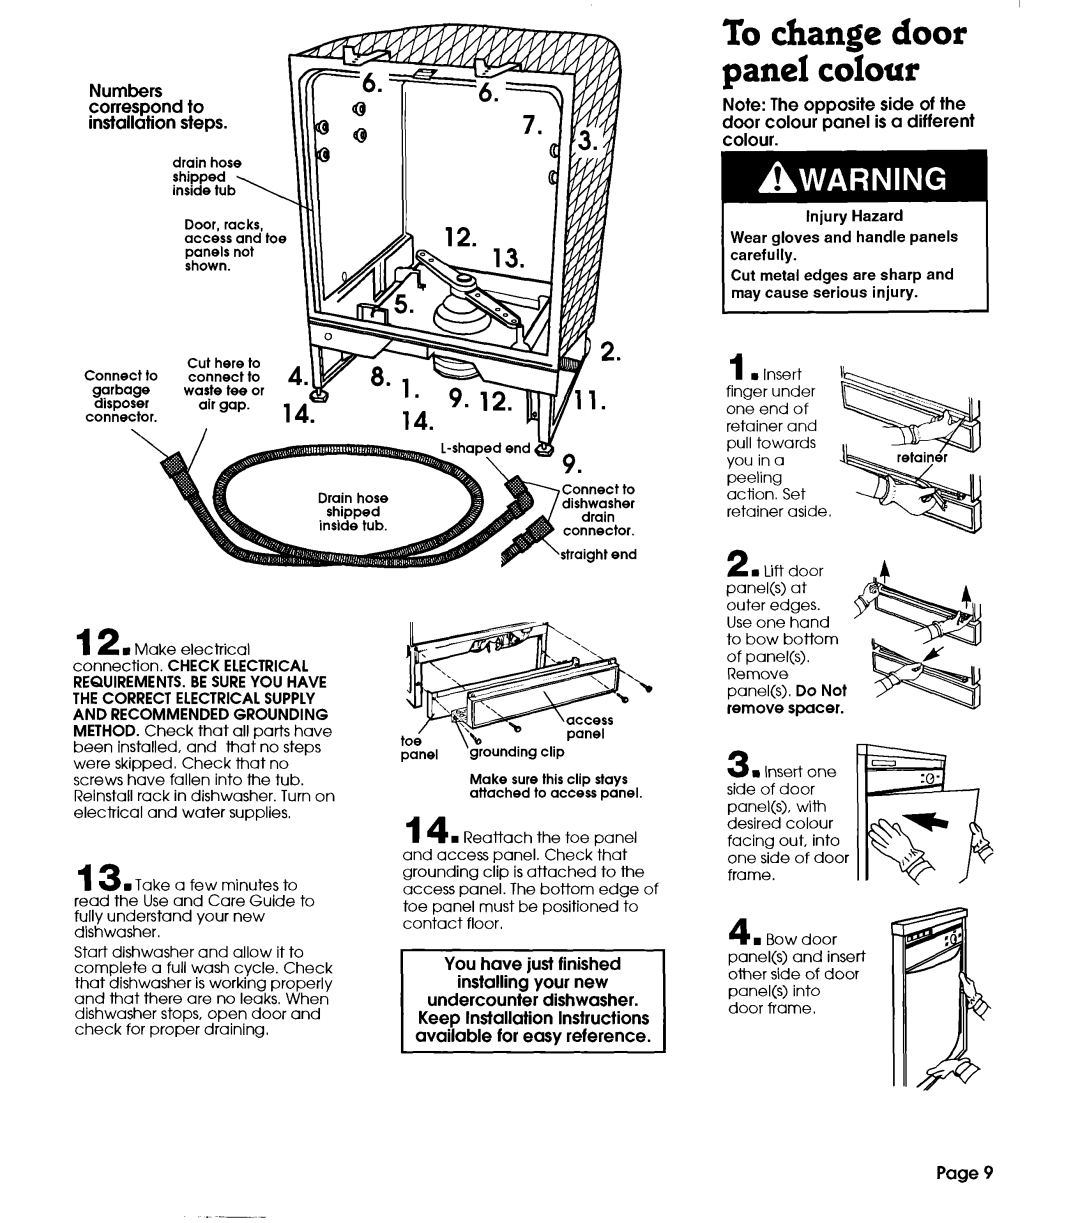 Whirlpool 801 installation instructions To change door Dane1colour, Numbers correspond to installation steps, Page 